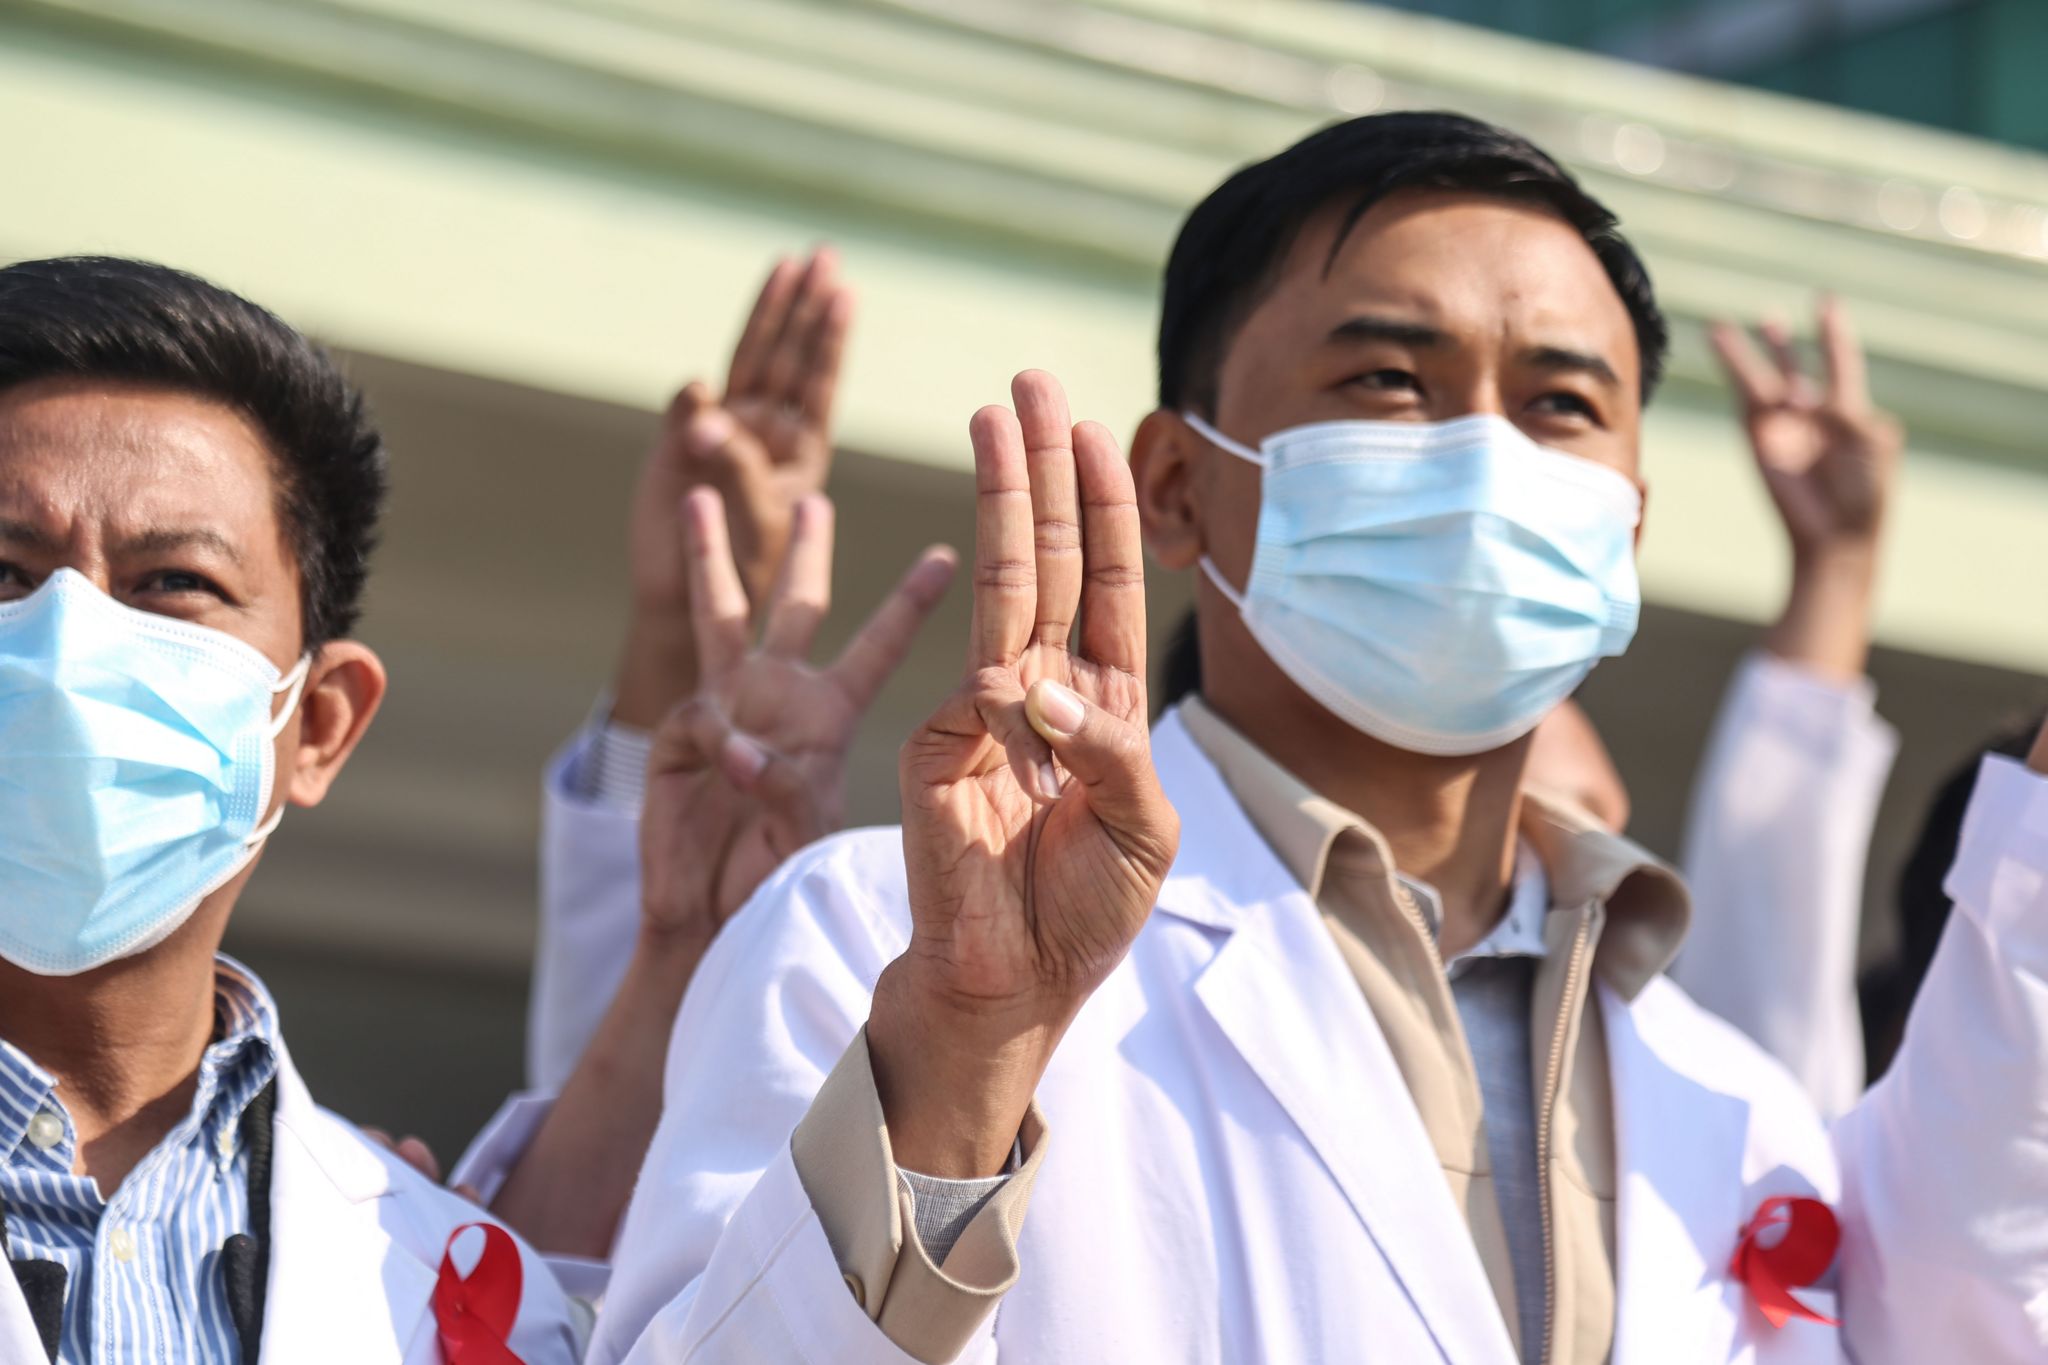 Doctors in Myanmar showing their discontent with the coup, 3 February 2021